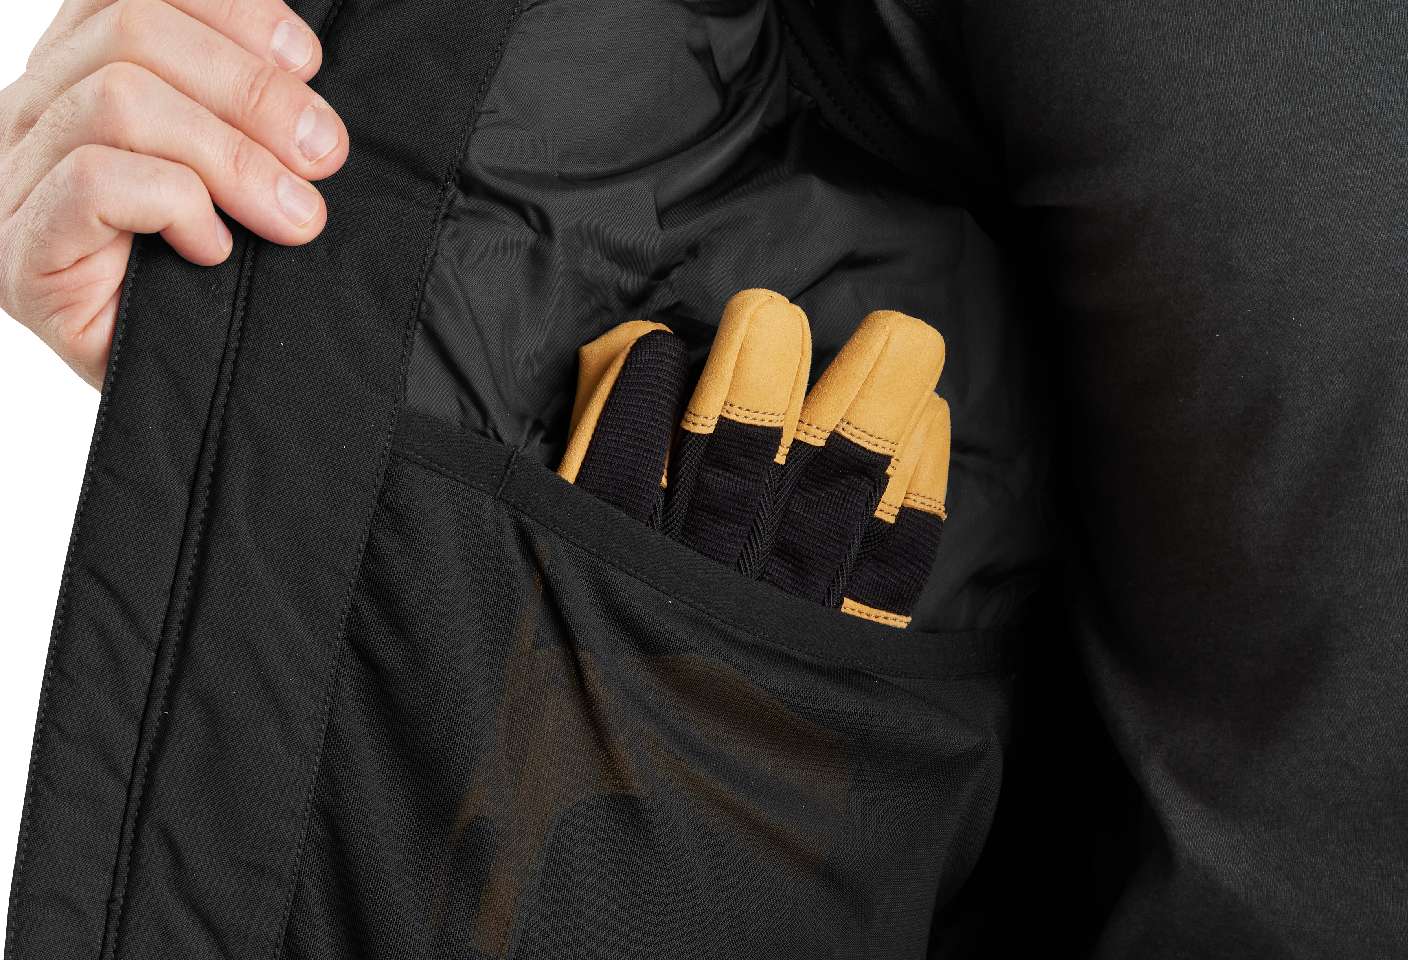 A large interior utility pocket give you extra storage space.